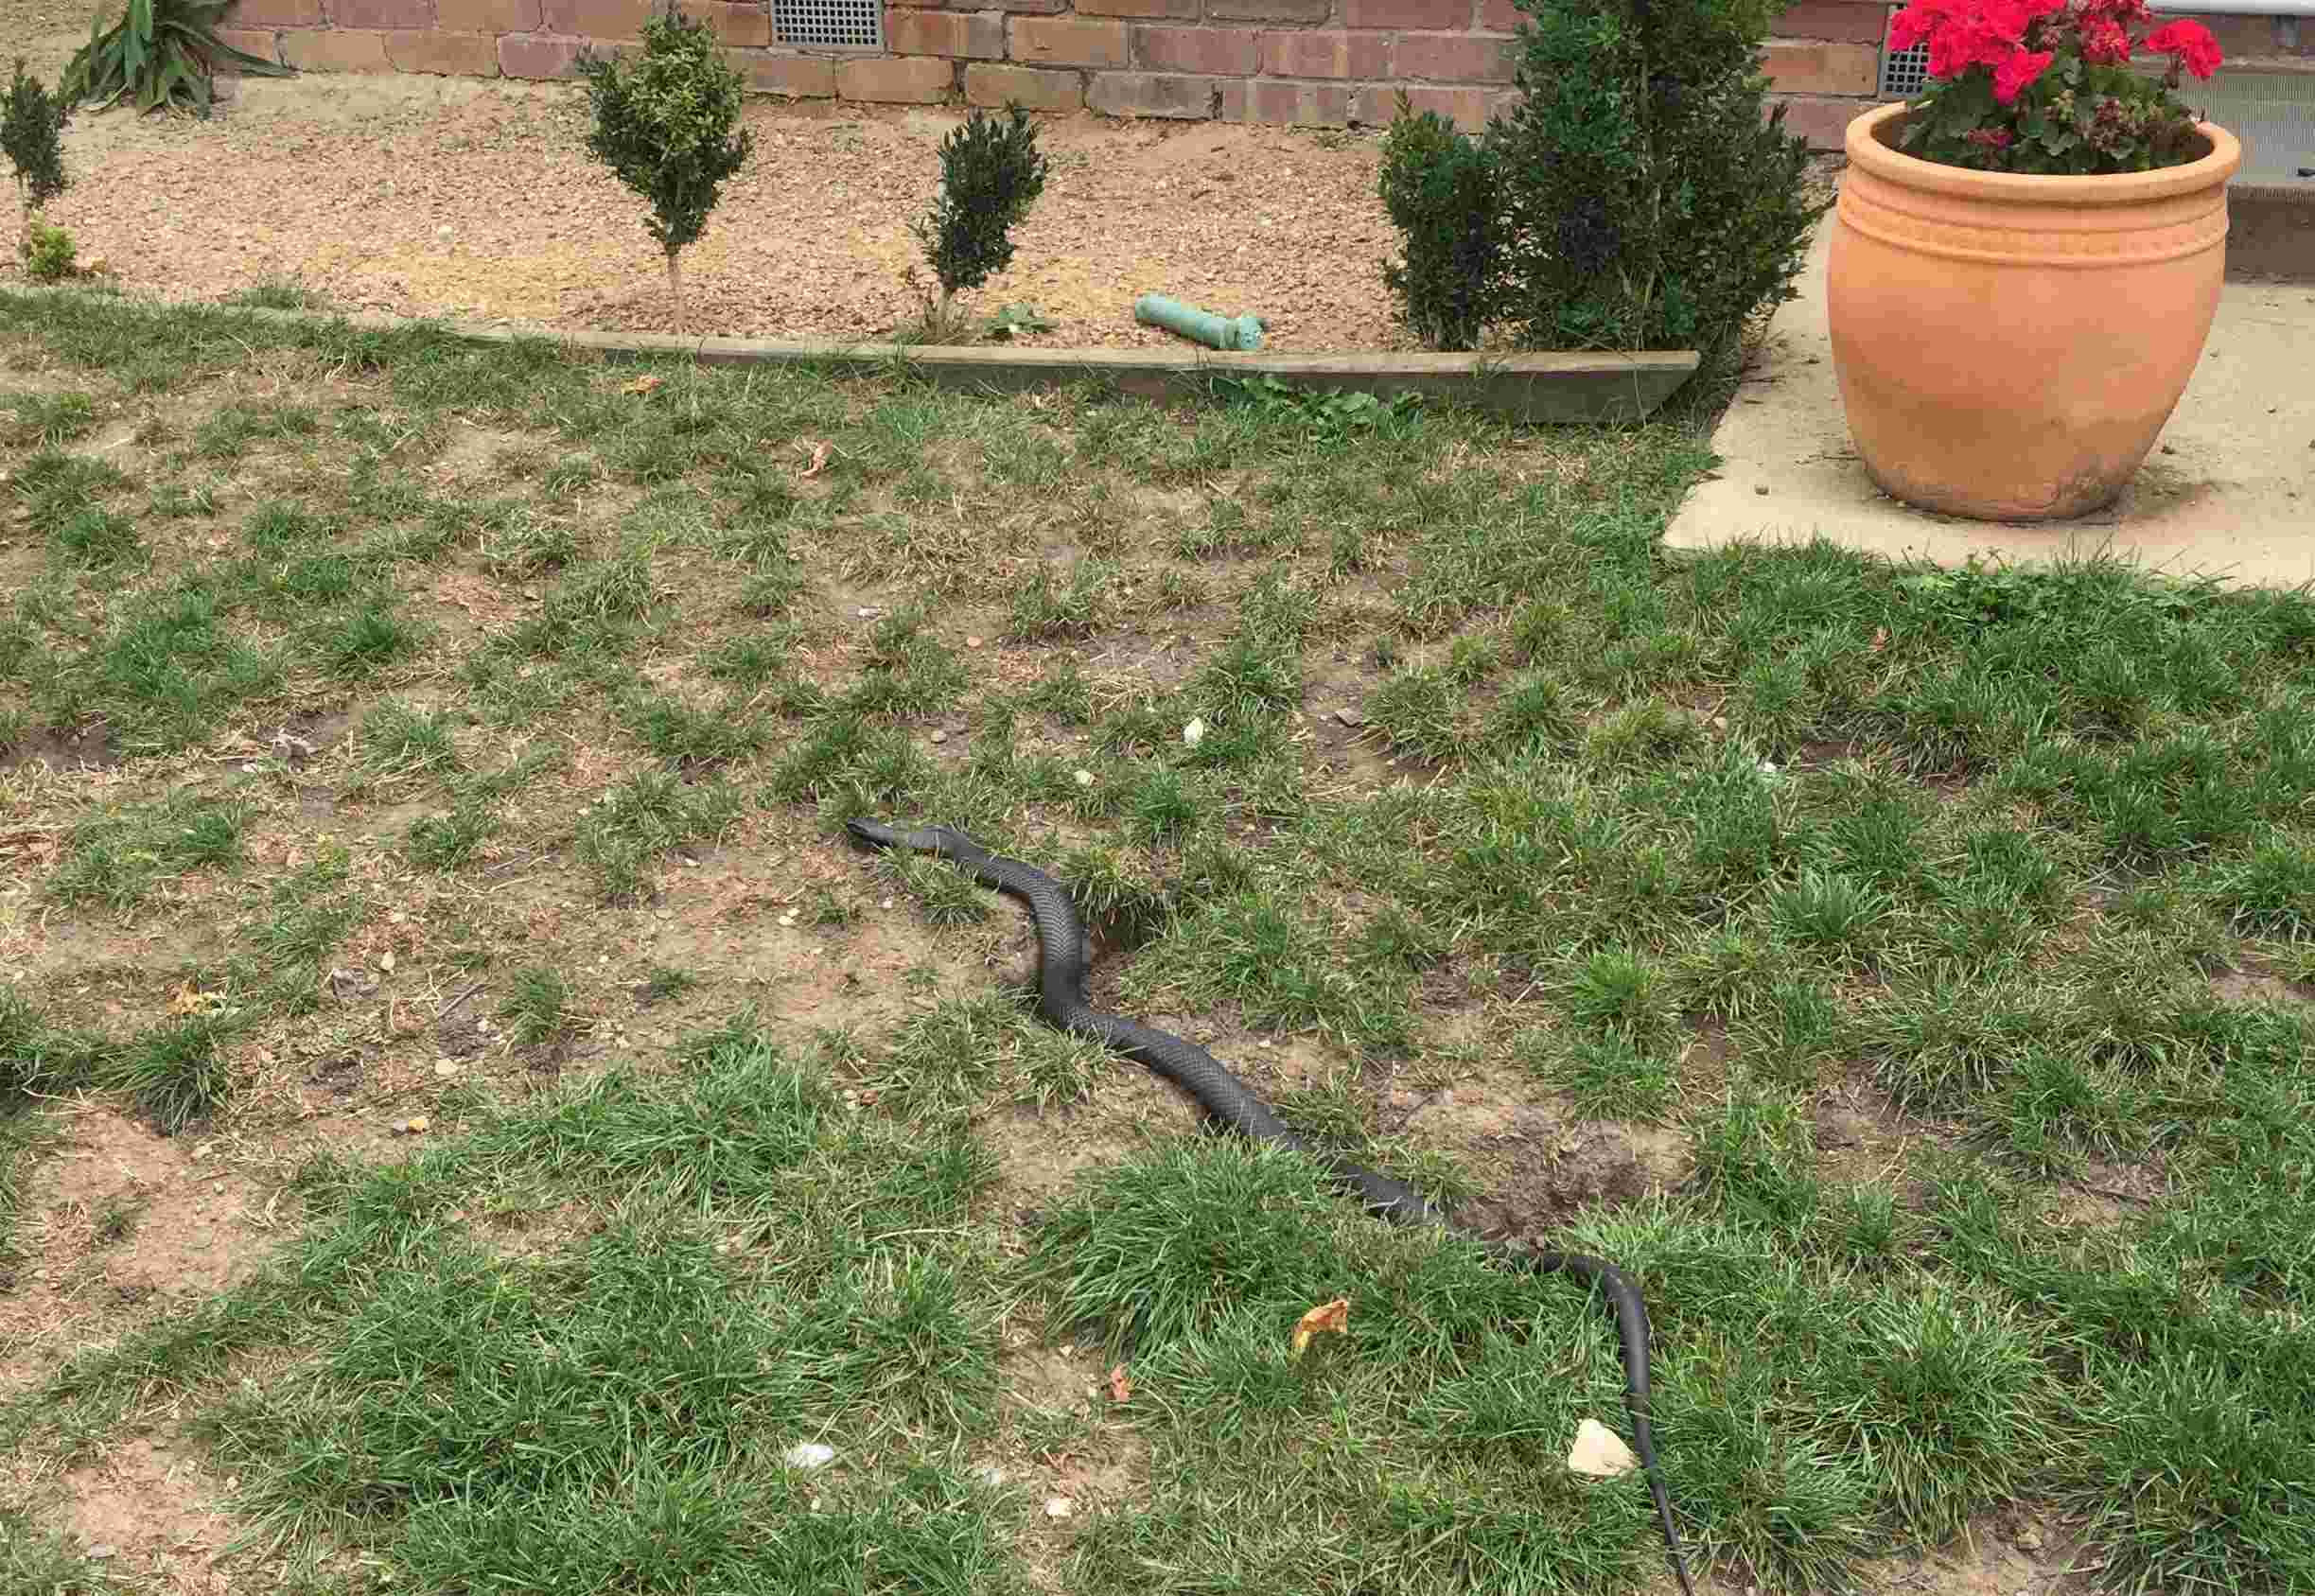 How To Get Rid Of Snakes In Your Backyard